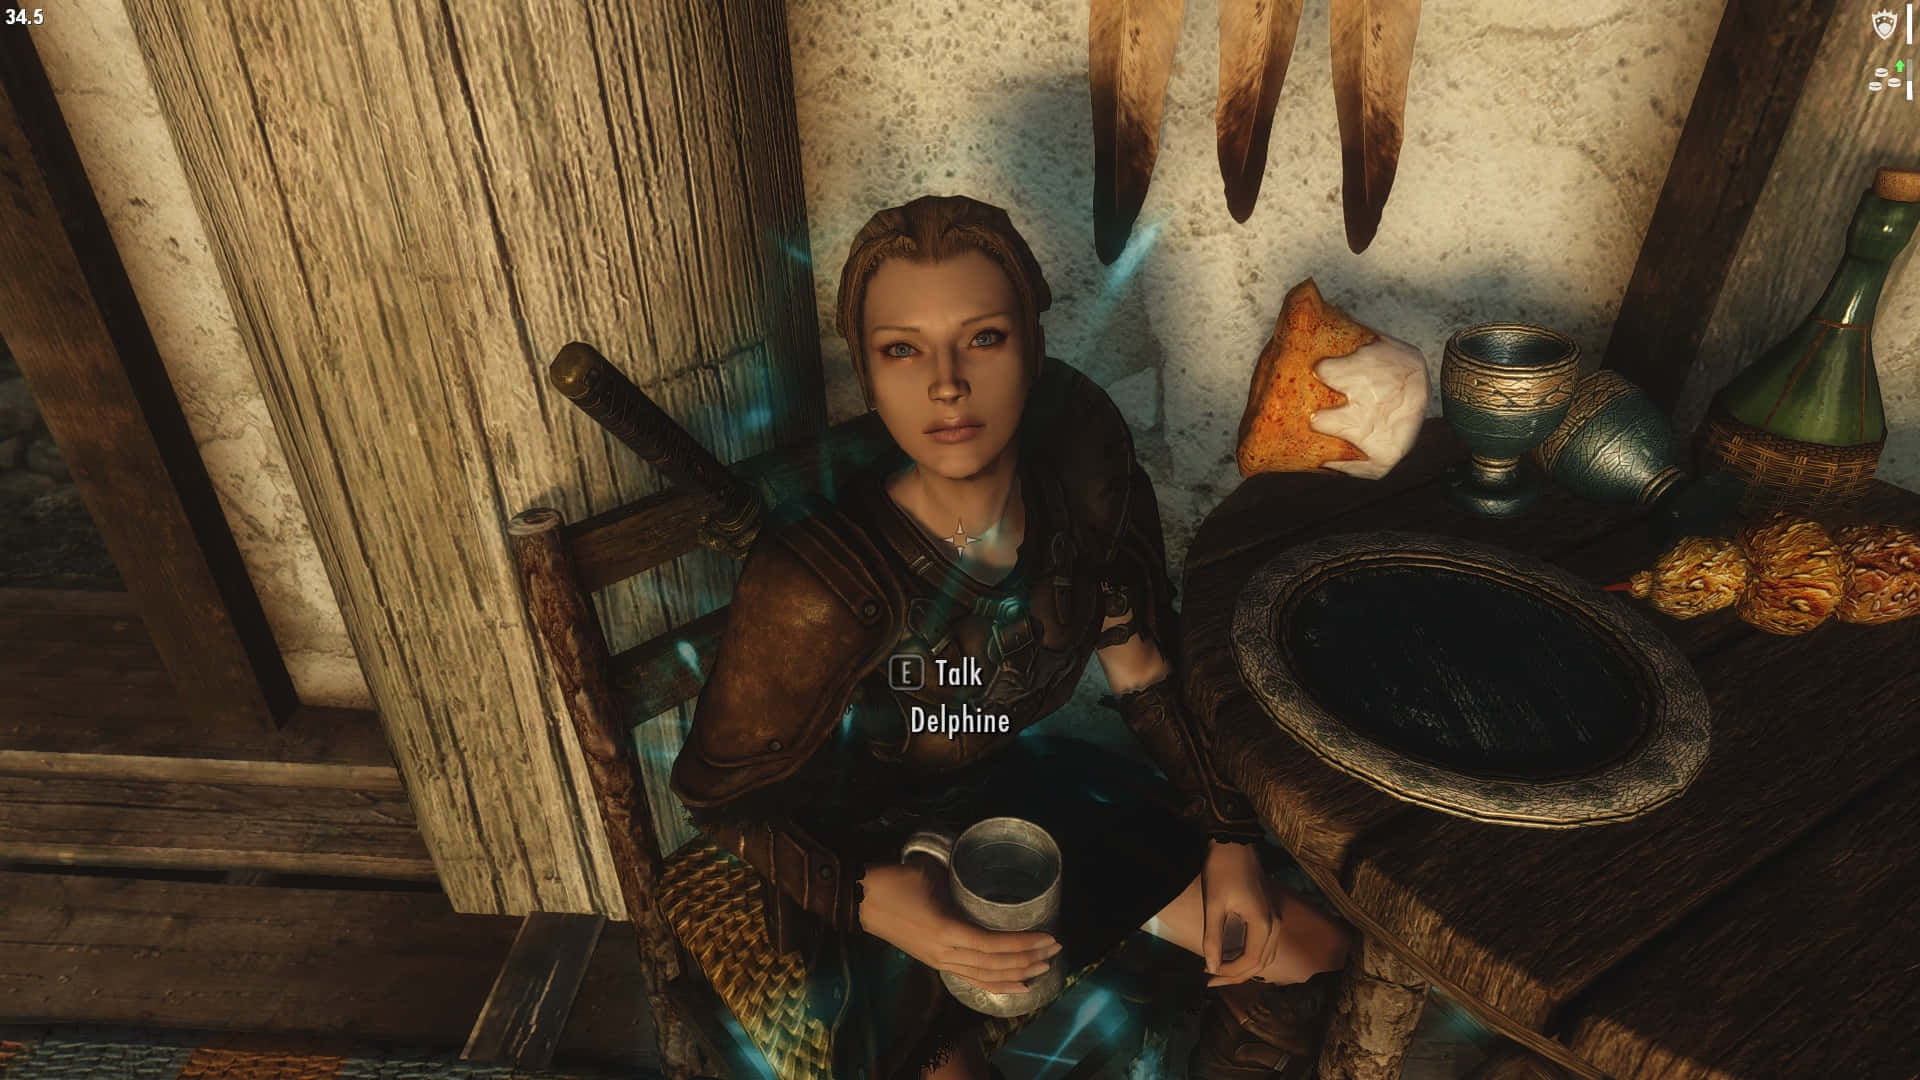 Delphine, The Blades Agent from Skyrim Wallpaper